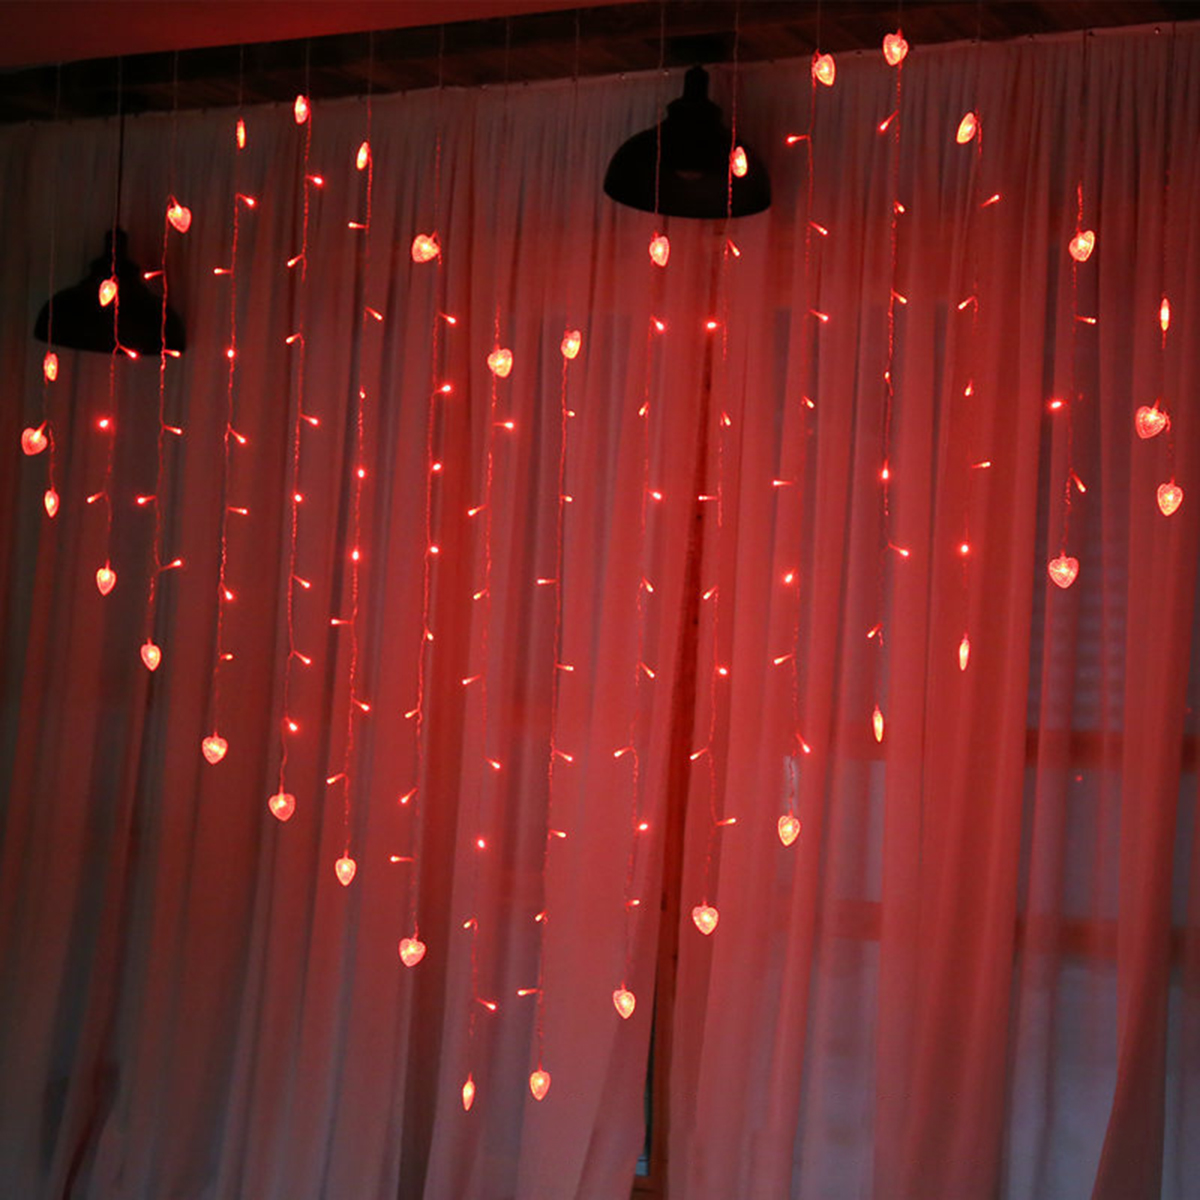 200X150cm-LED-LoveButterfly-Shape-Curtain-Lights-String-USB-Powered-Waterproof-Wall-Light-Hanging-Fa-1704556-3